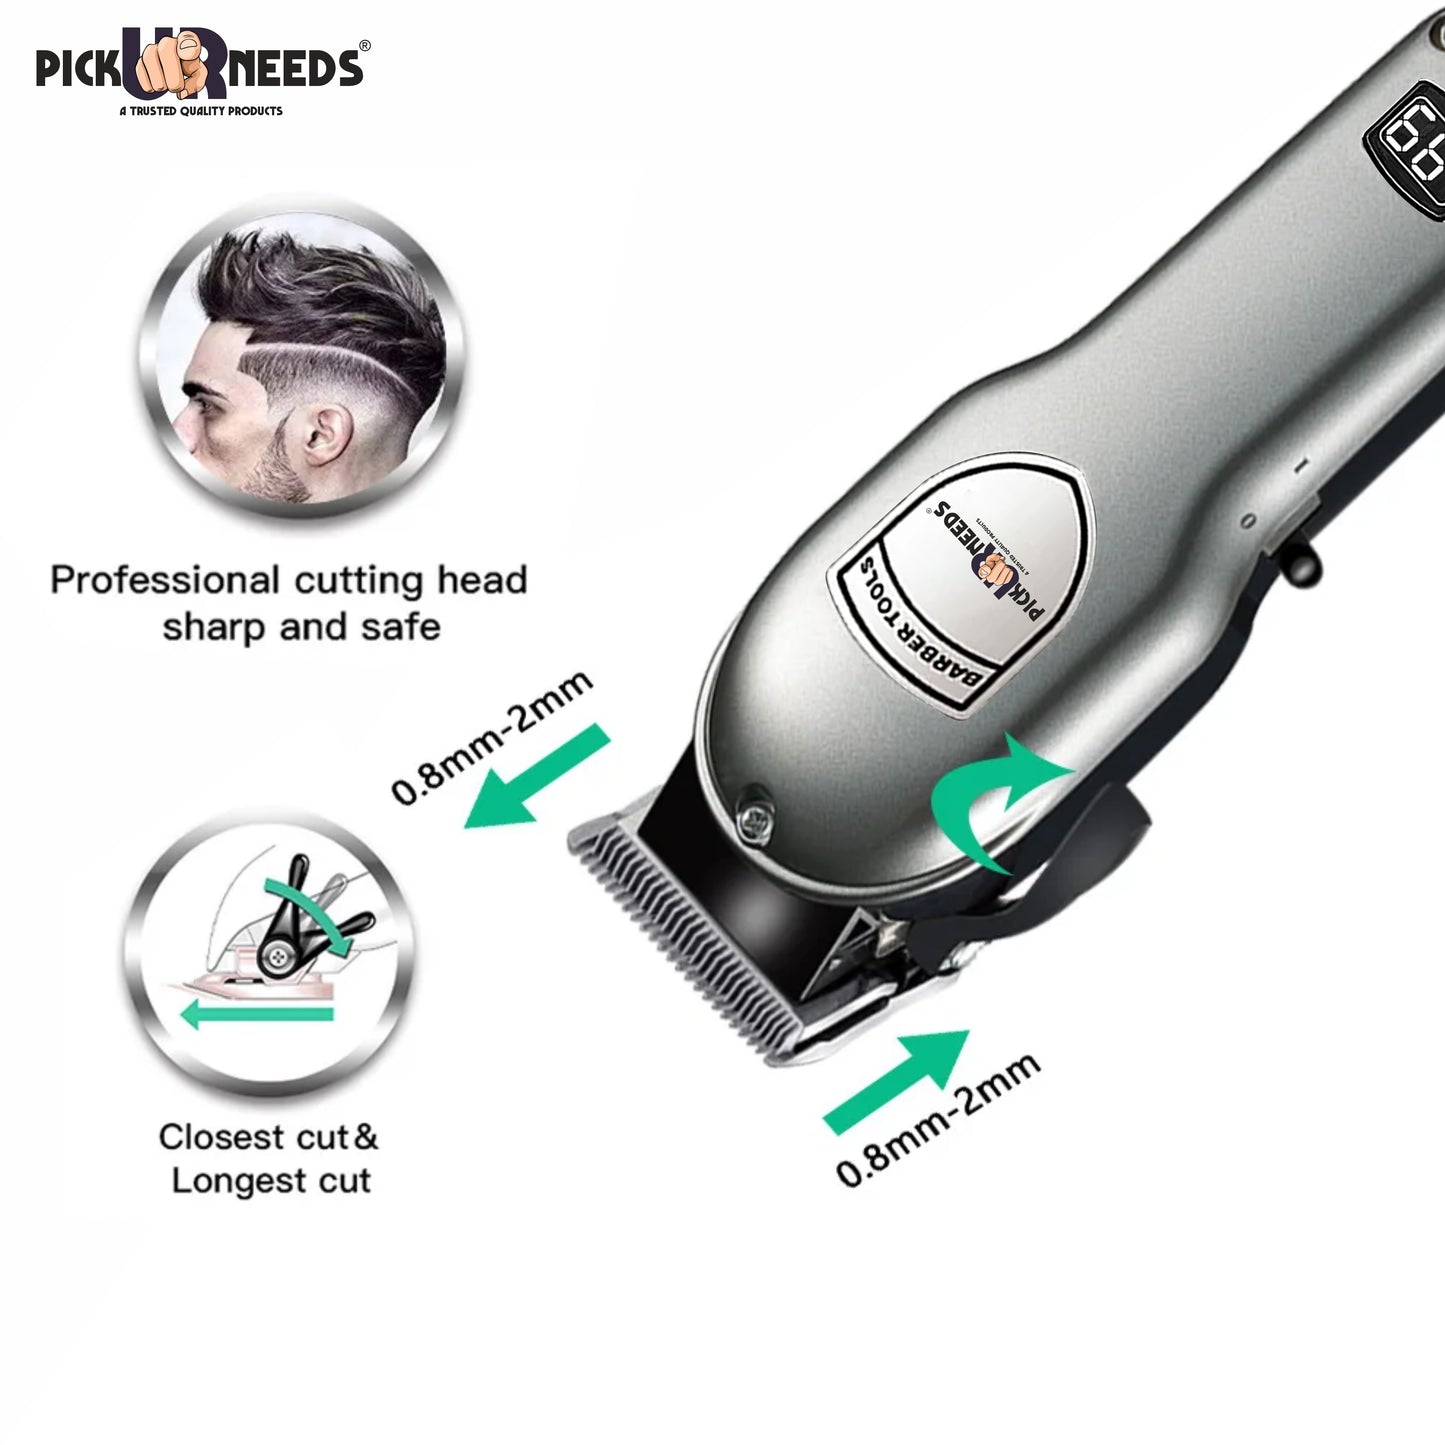 Pick Ur Needs Rechargeable Professional Hair Clipper / Trimmer For Men With LED Indicator 6W Trimmer 180 min Runtime 8 Length Settings